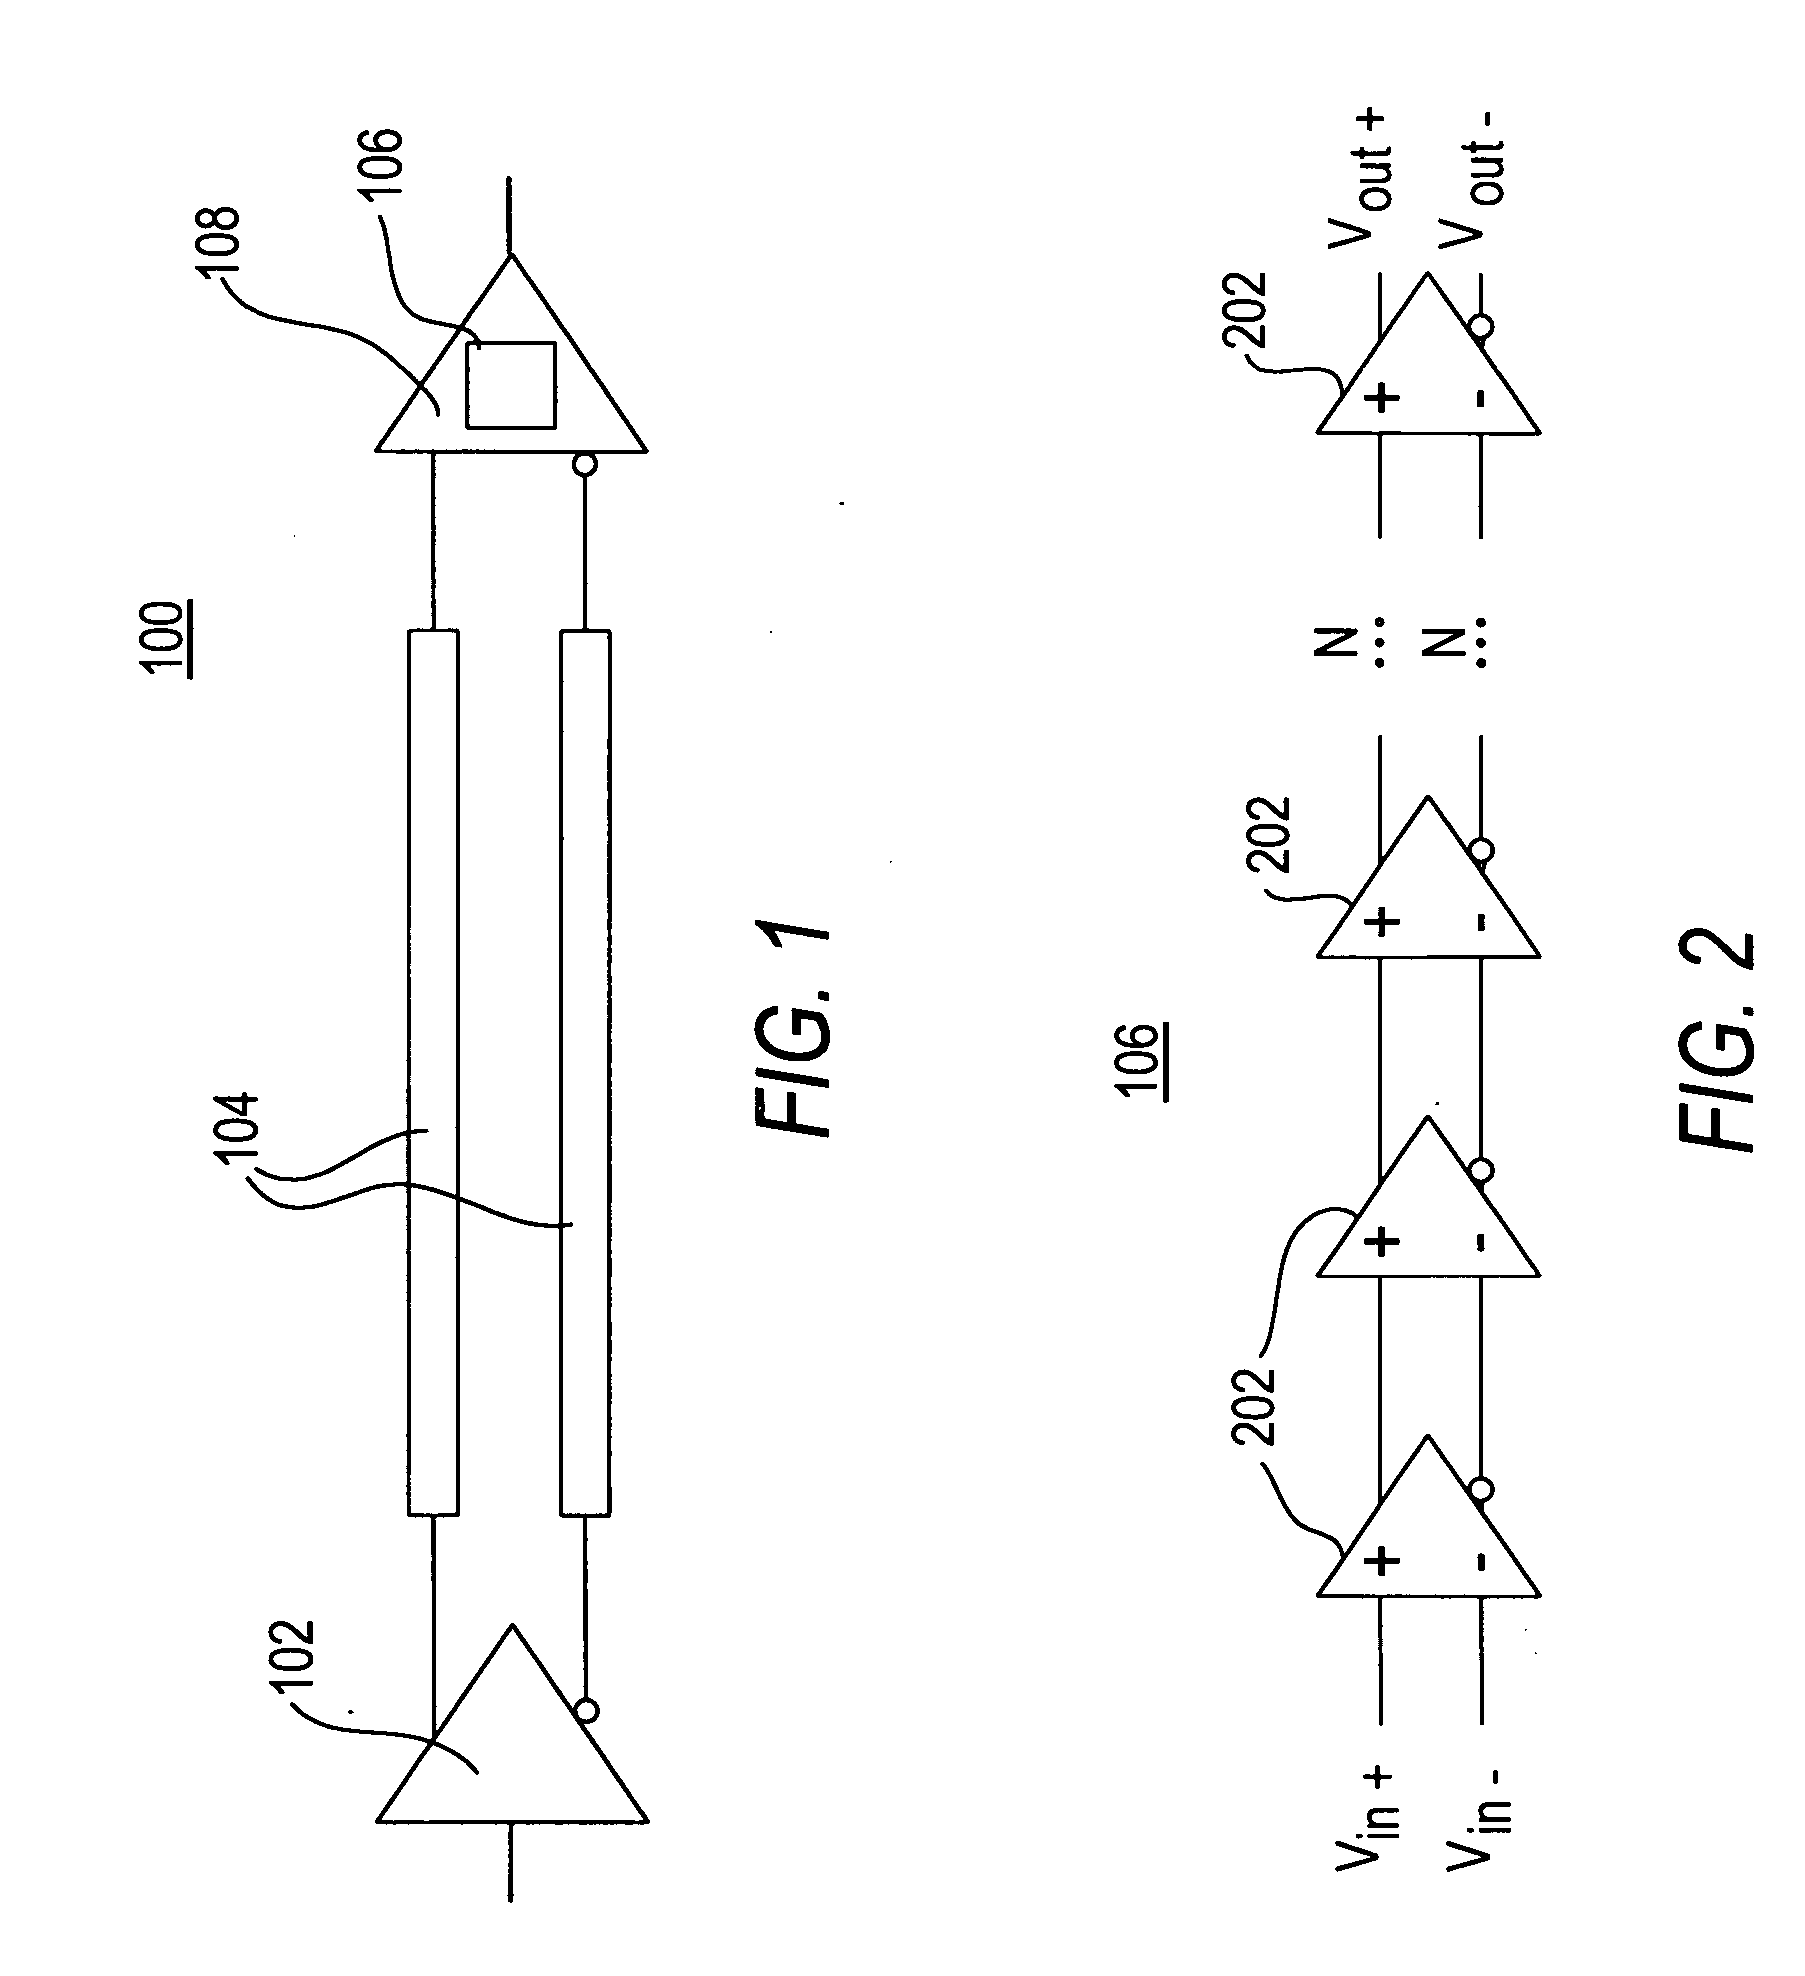 Programmable receiver equalization circuitry and methods